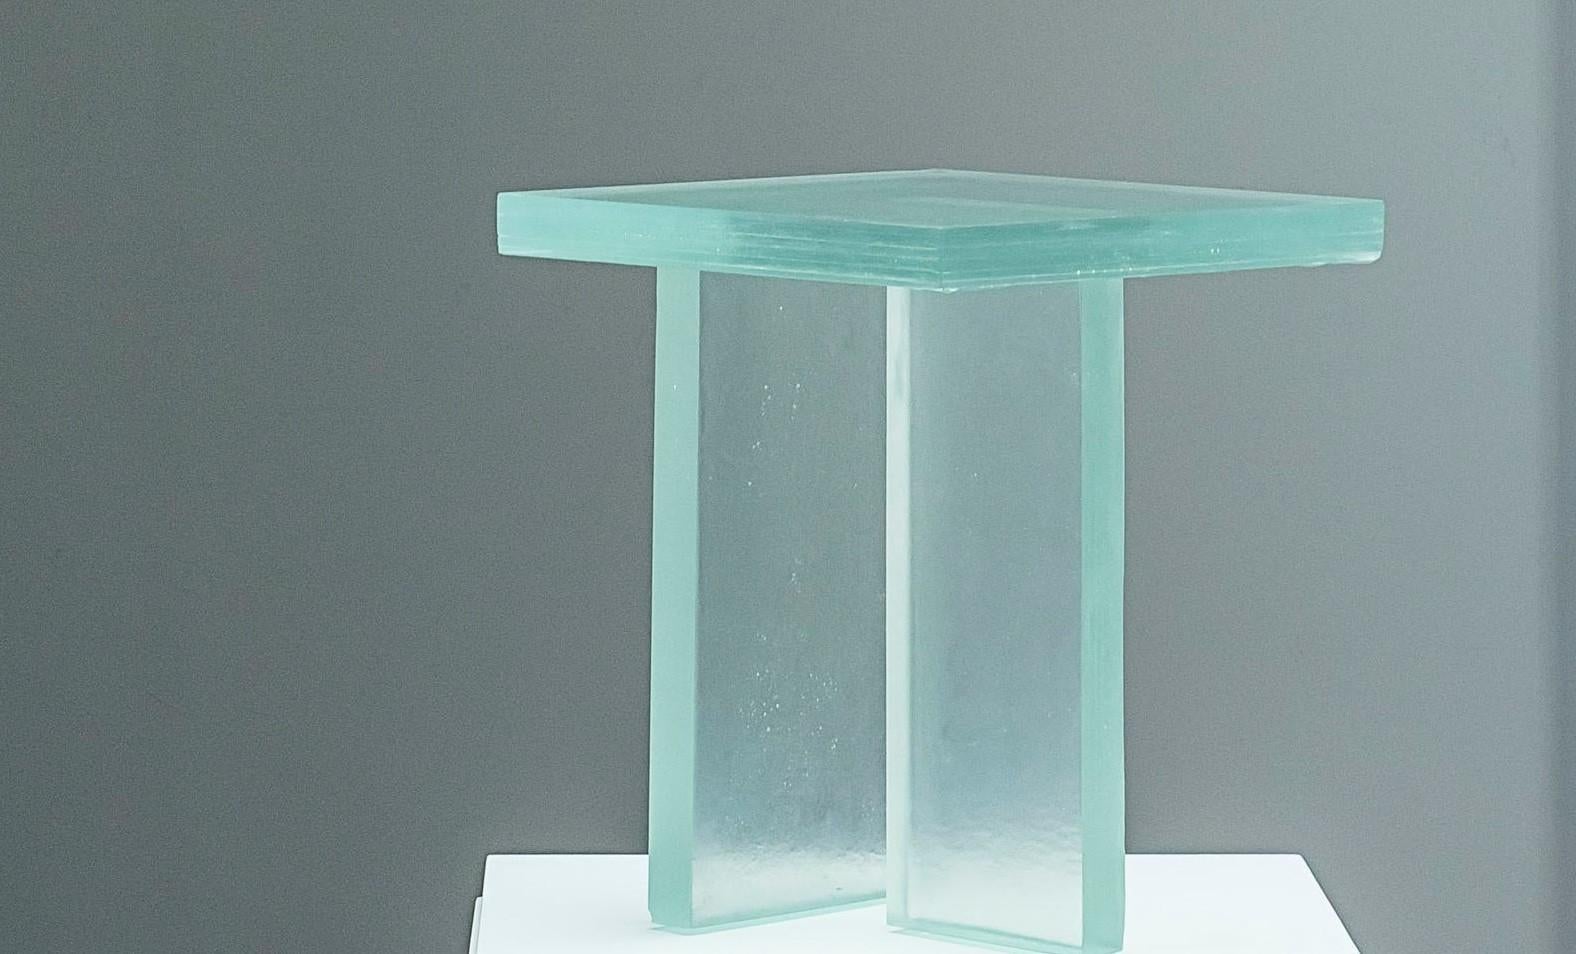 Glass table T by Studio Cas-Lucas Recchia.
Dimensions: W 40 x D 40 x H 40 cm.
Materials: Glass.
Technique: Fusing glass.

Table T is a piece developed at the request of the Iberê Camargo Foundation, responsible for taking care of the work of